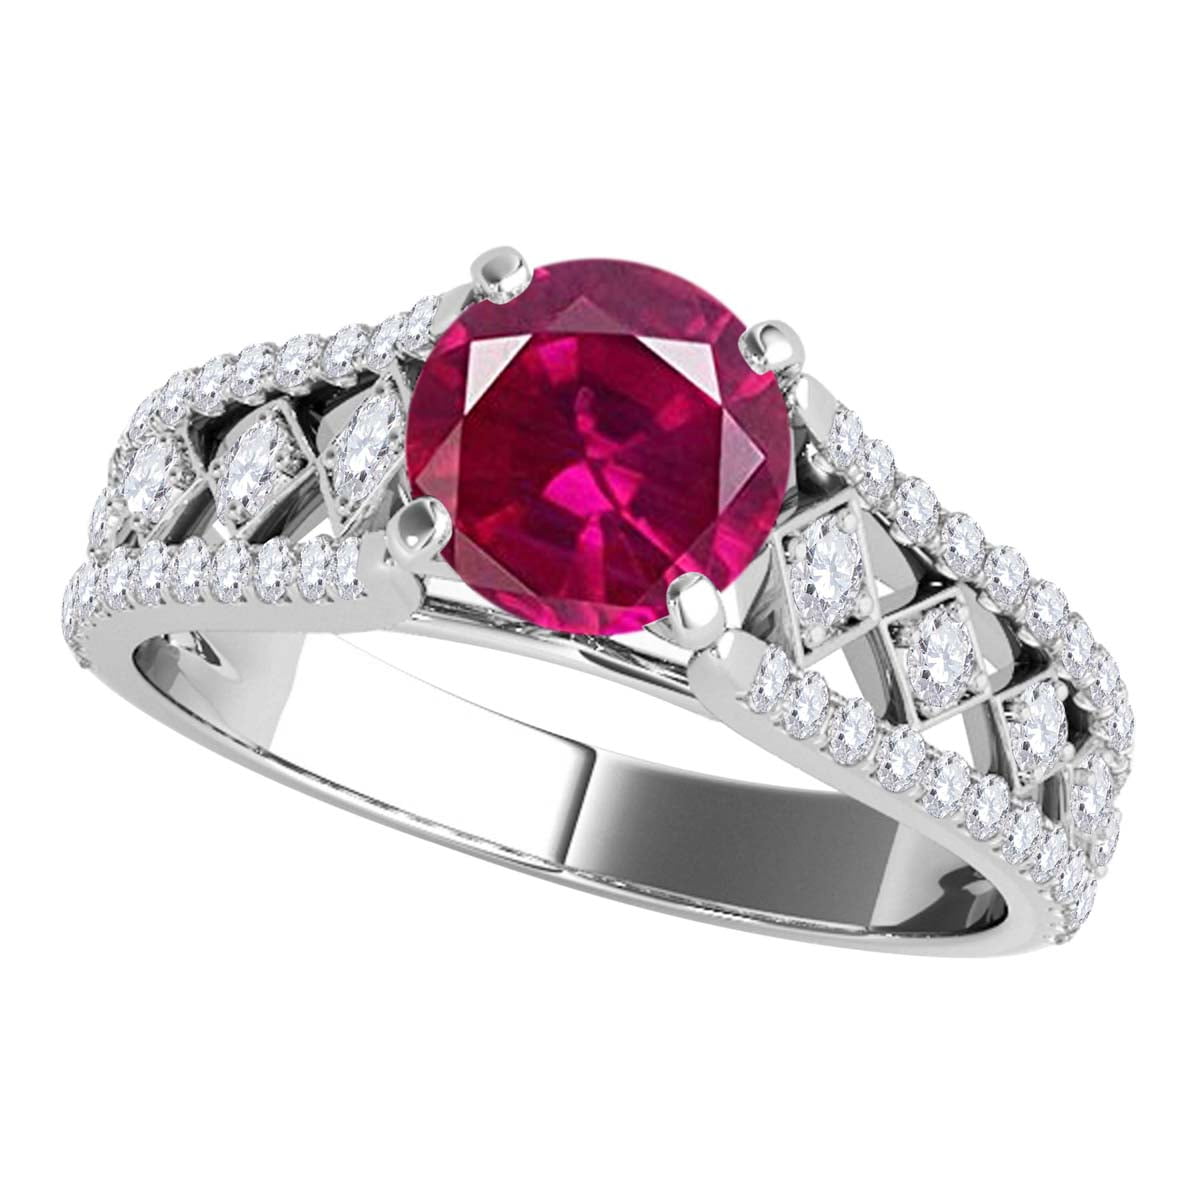 WHITE GOLD NATURAL COLOR CONTEMPORARY RUBY DIAMOND RING